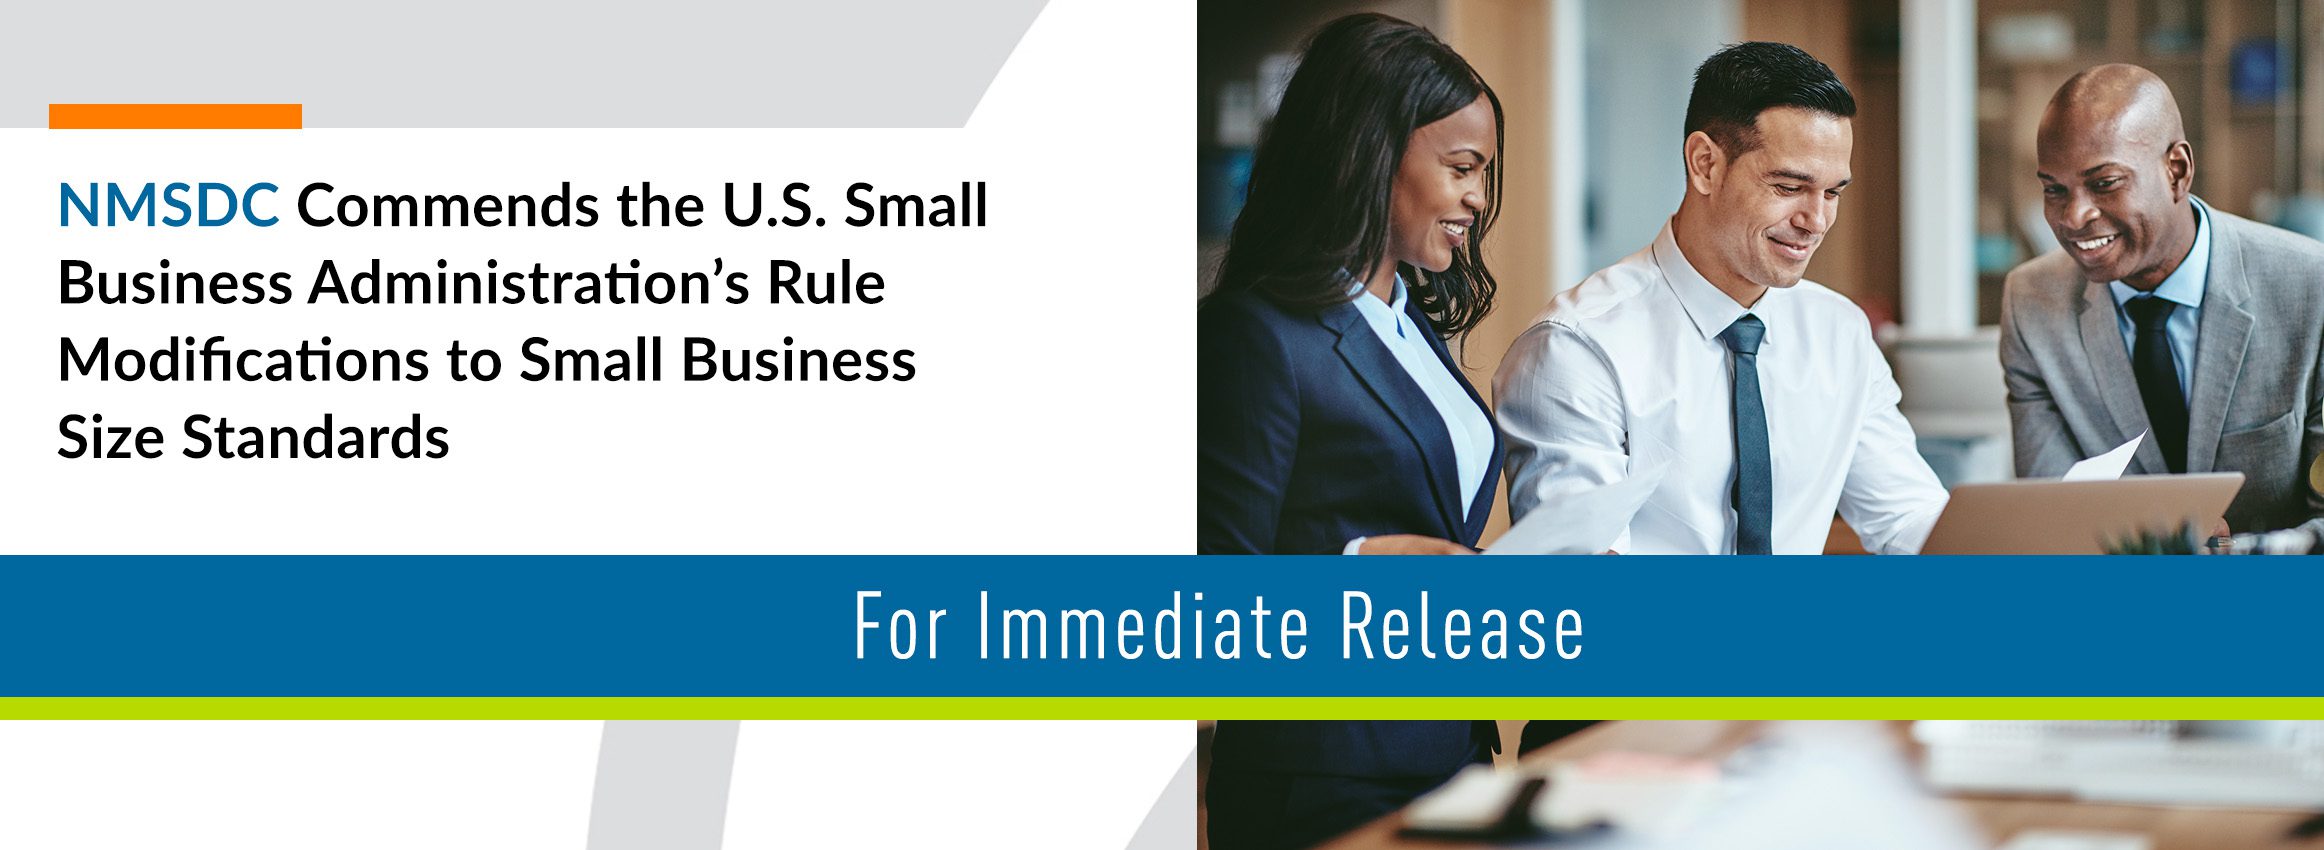 NMSDC Commends the U.S. Small Business Administration’s Rule Modifications to Small Business Size Standards